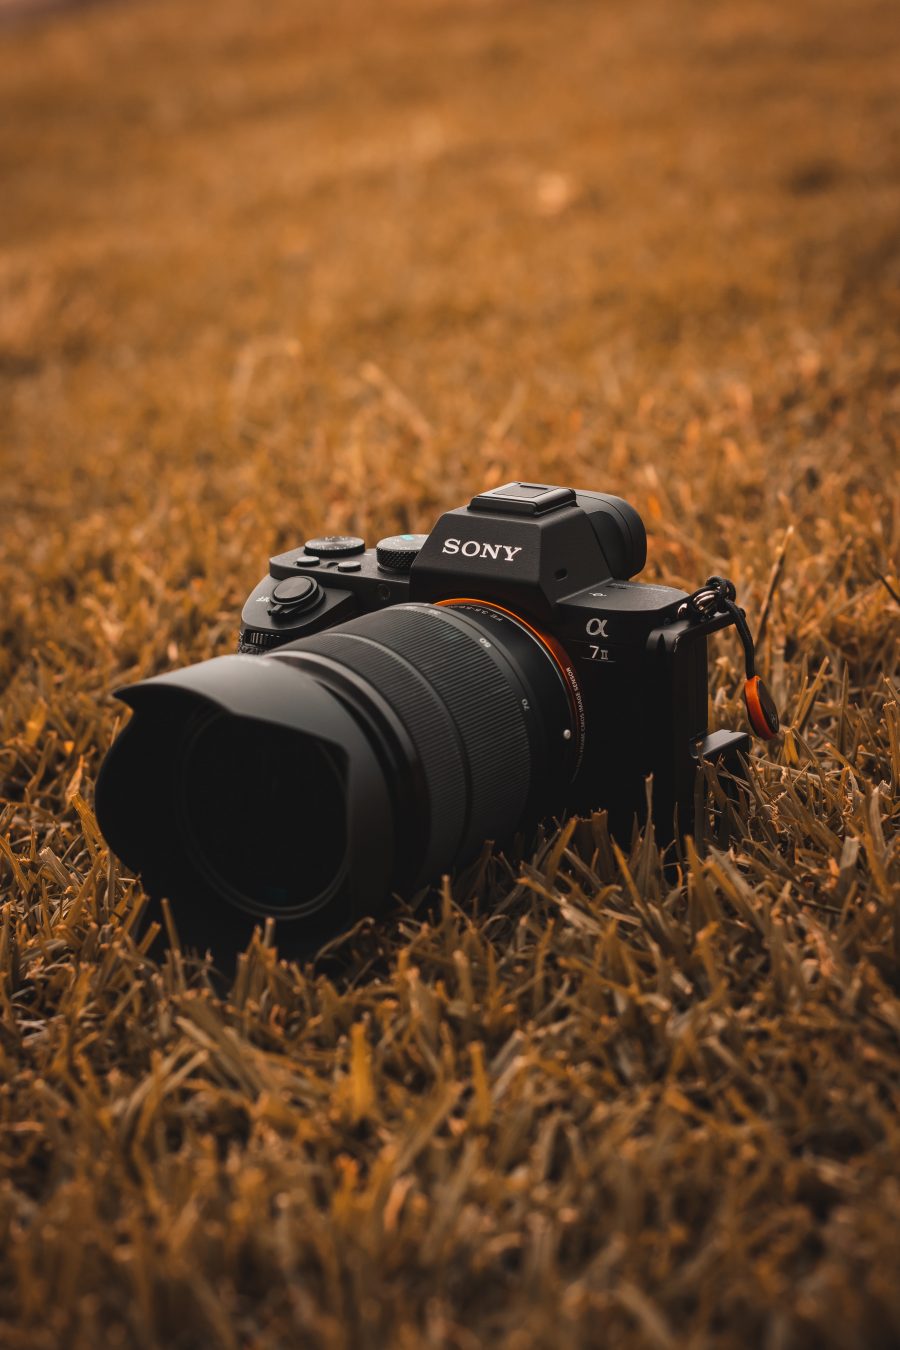 Sony Photography Courses for Beginners